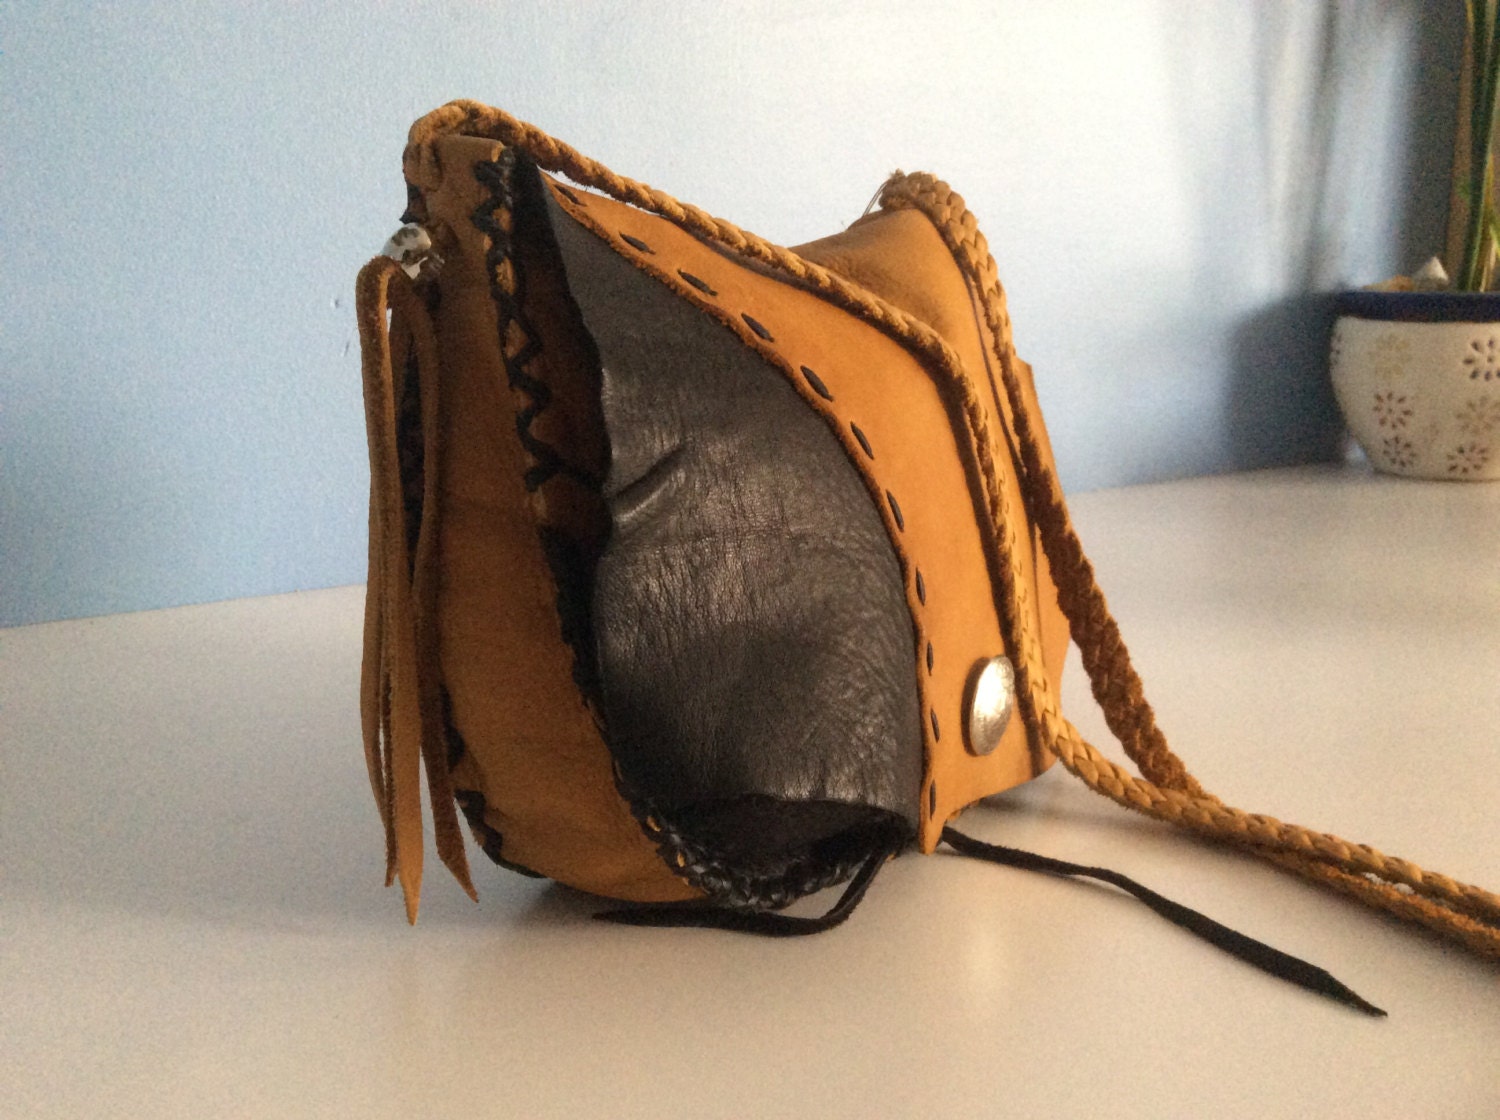 Handmade Leather Purse Western Style Shoulder Bag Black and